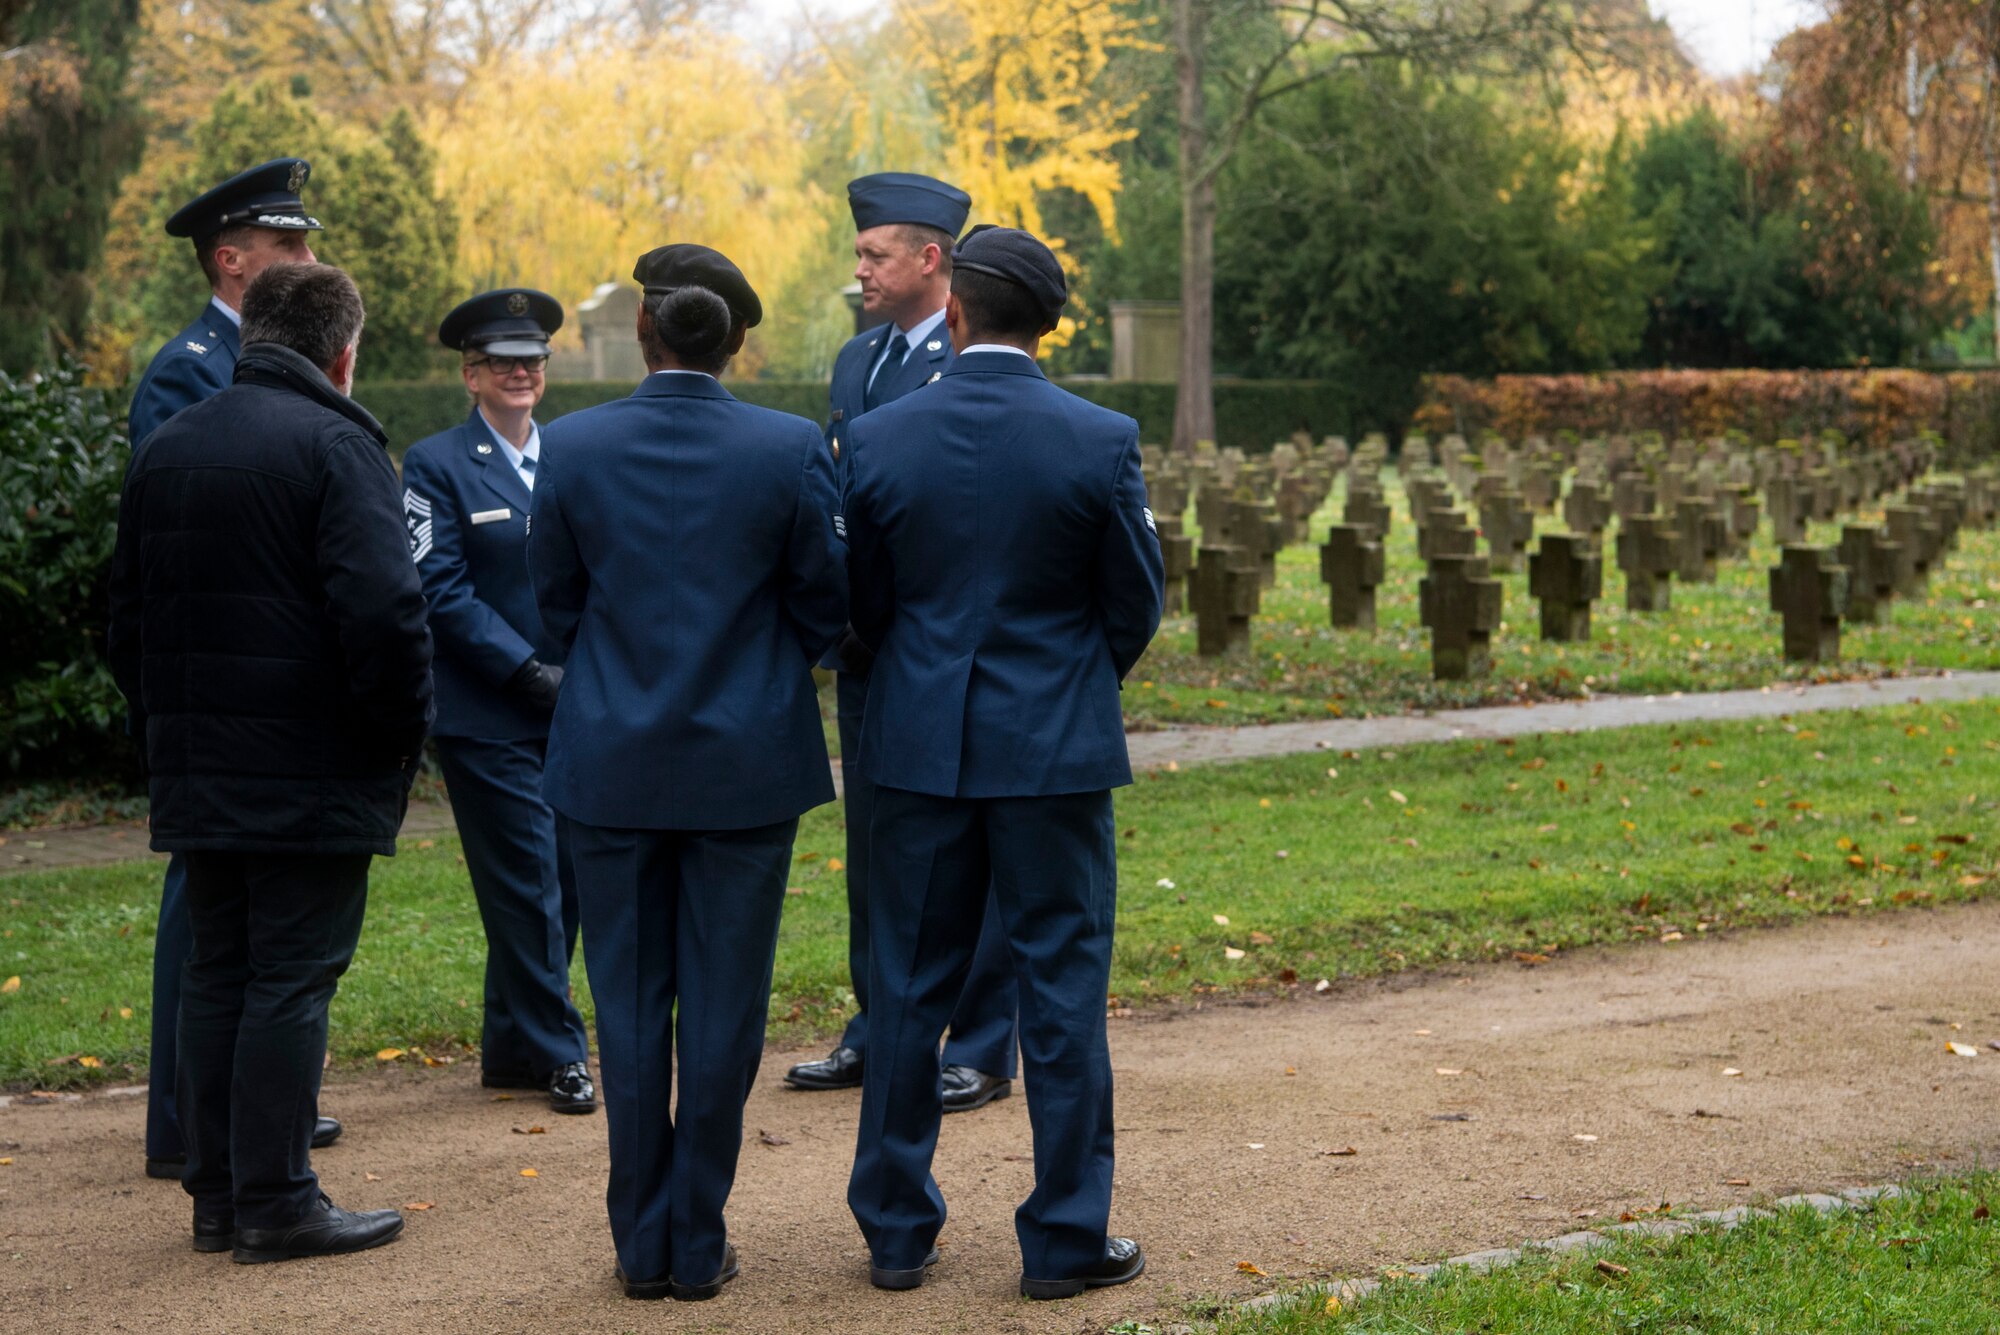 U.S. Air Force Col. David Epperson, 52nd Fighter Wing commander, back left, Chief Master Sgt. Stephanie Cates, 52nd FW command chief, back center left, and members of the 52nd FW, reflect on the German National Day of Mourning after participating in a commemoration ceremony at the Trier cemetery in Trier, Germany, Nov. 17, 2019. Members of the 52nd Security Forces Squadron laid a wreath to honor all those who have lost their lives to war. In some parts of the country, the annual holiday is a silent day, meaning music and dancing are prohibited. (U.S. Air Force photo by Airman 1st Class Valerie Seelye)